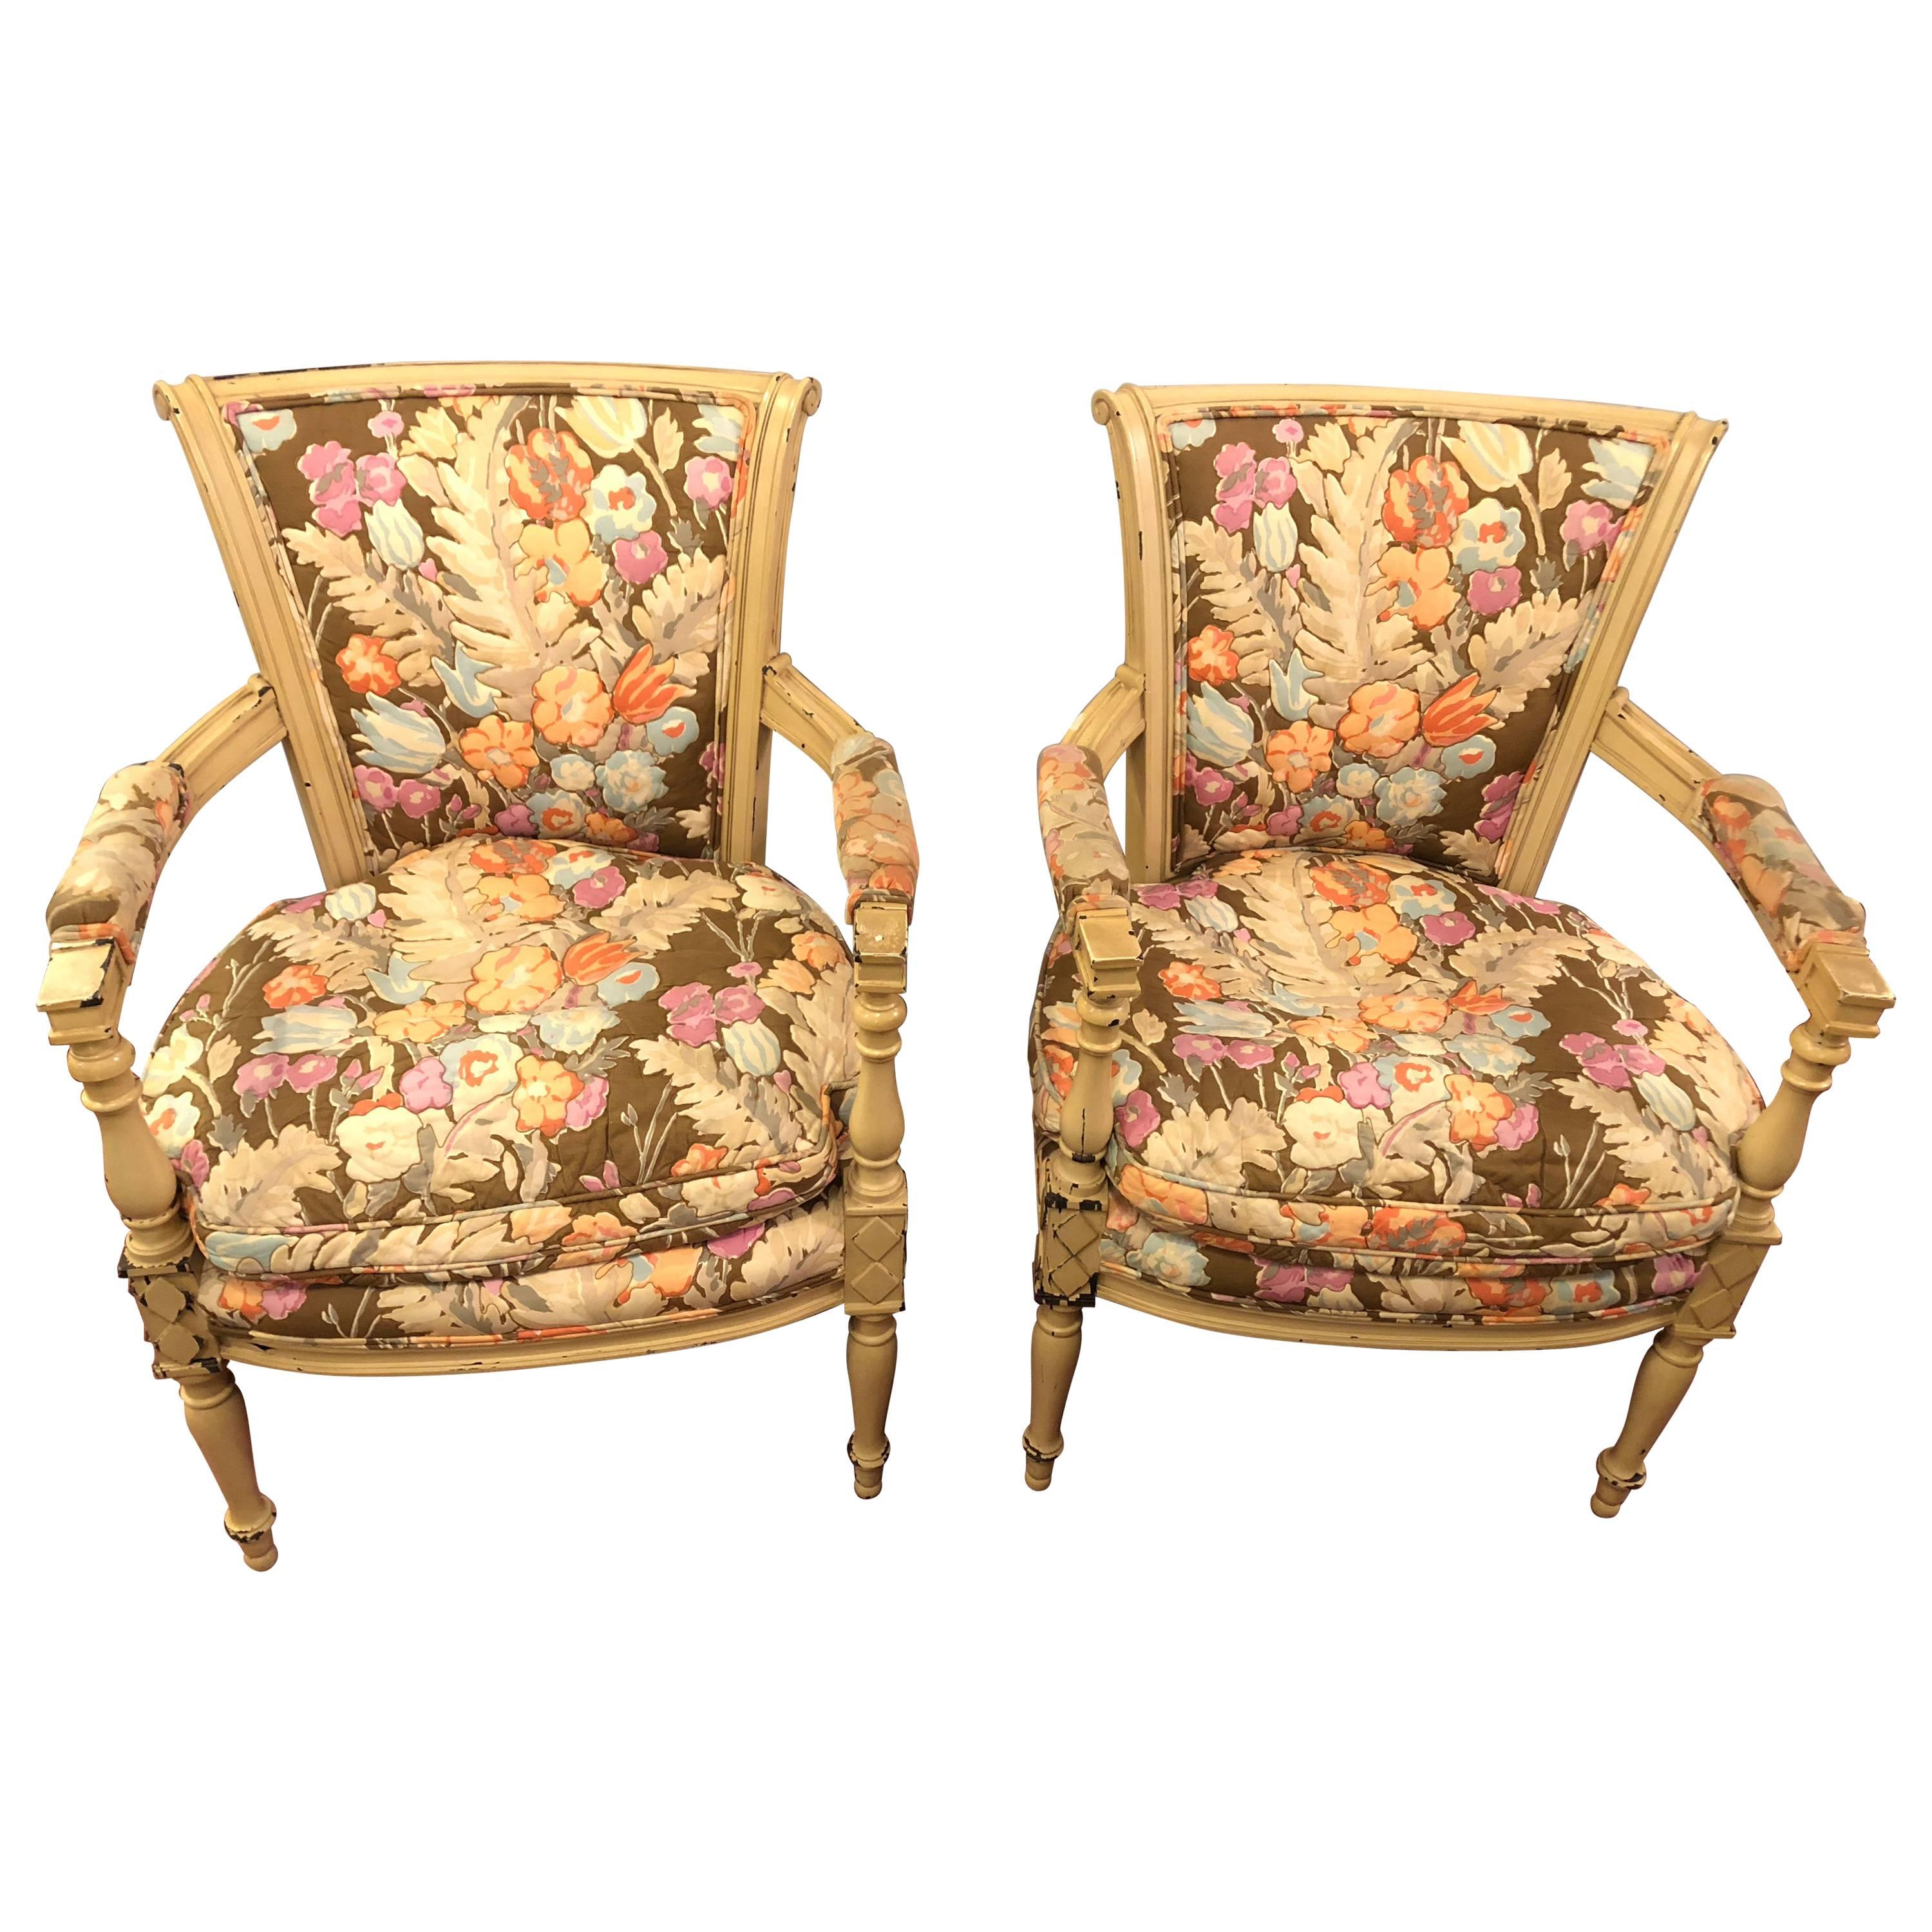 Pair of Paint Decorated Maison Jansen Fauteuils with Attractive Fabric